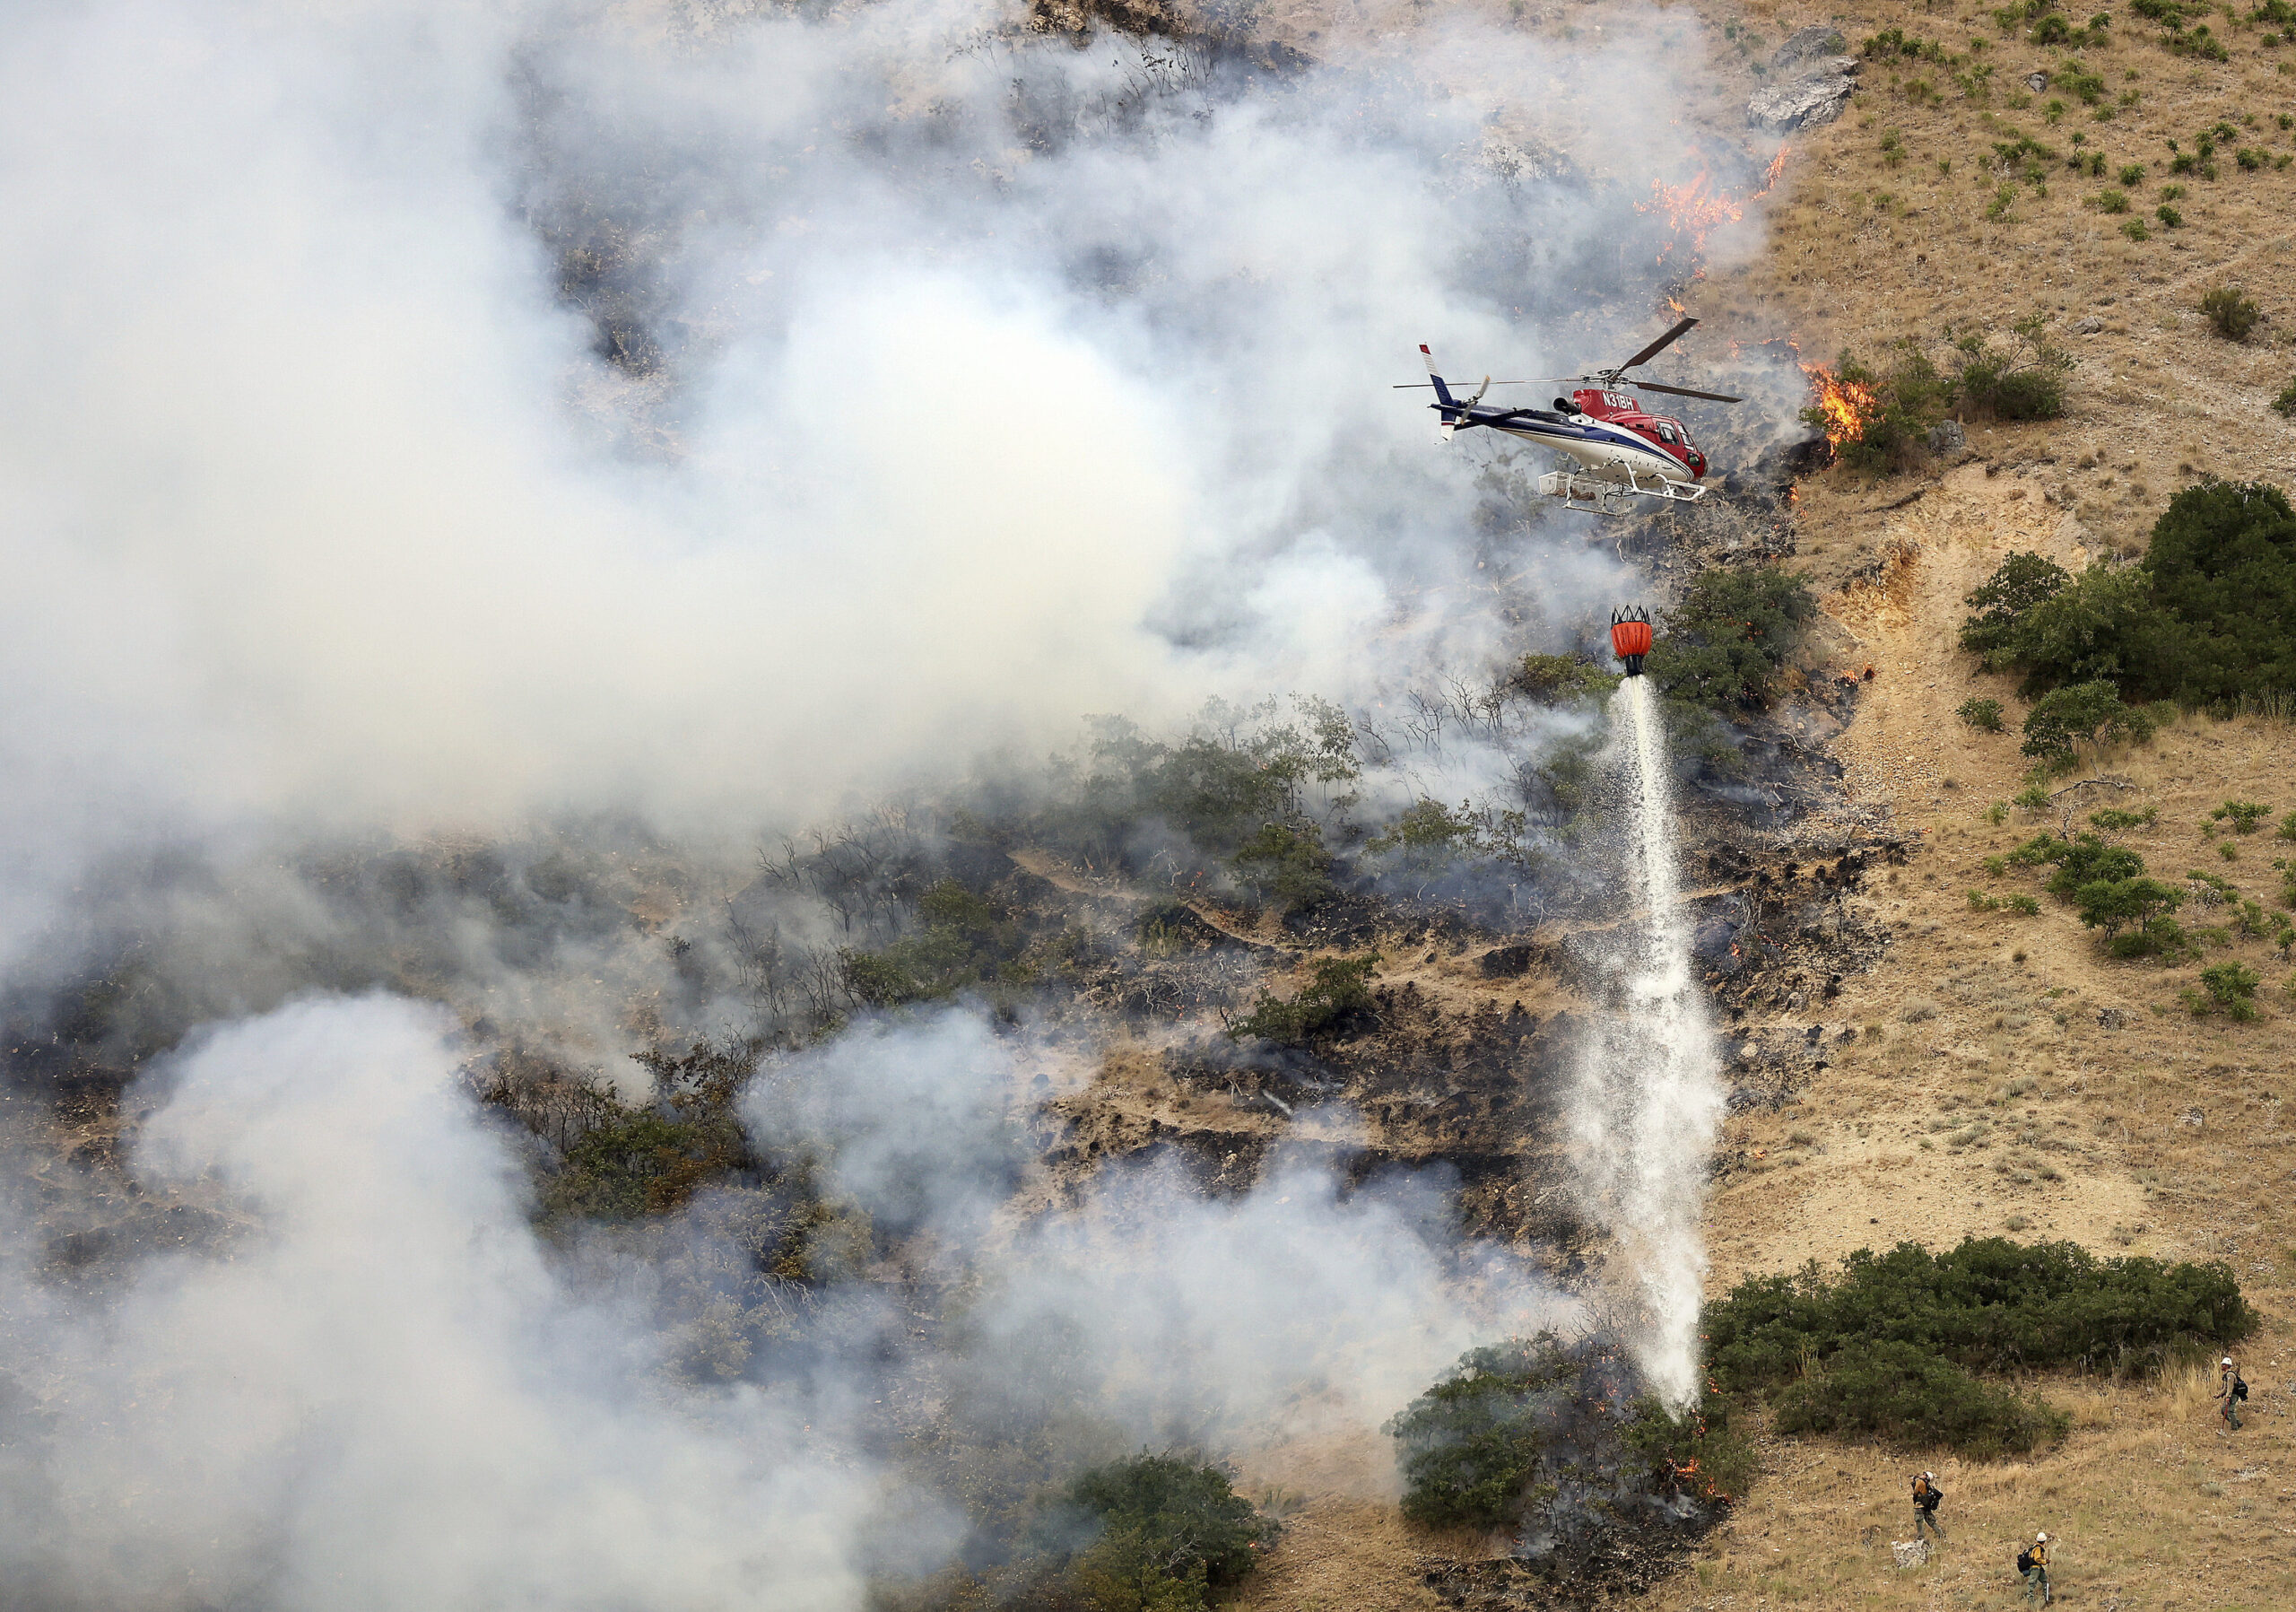 Firefighters battle a wildfire from the ground as a helicopter drops water above them in Springville on Monday, Aug. 1, 2022. The fire started when a man tried to burn a spider with a lighter. (Kristin Murphy/The Deseret News via AP)